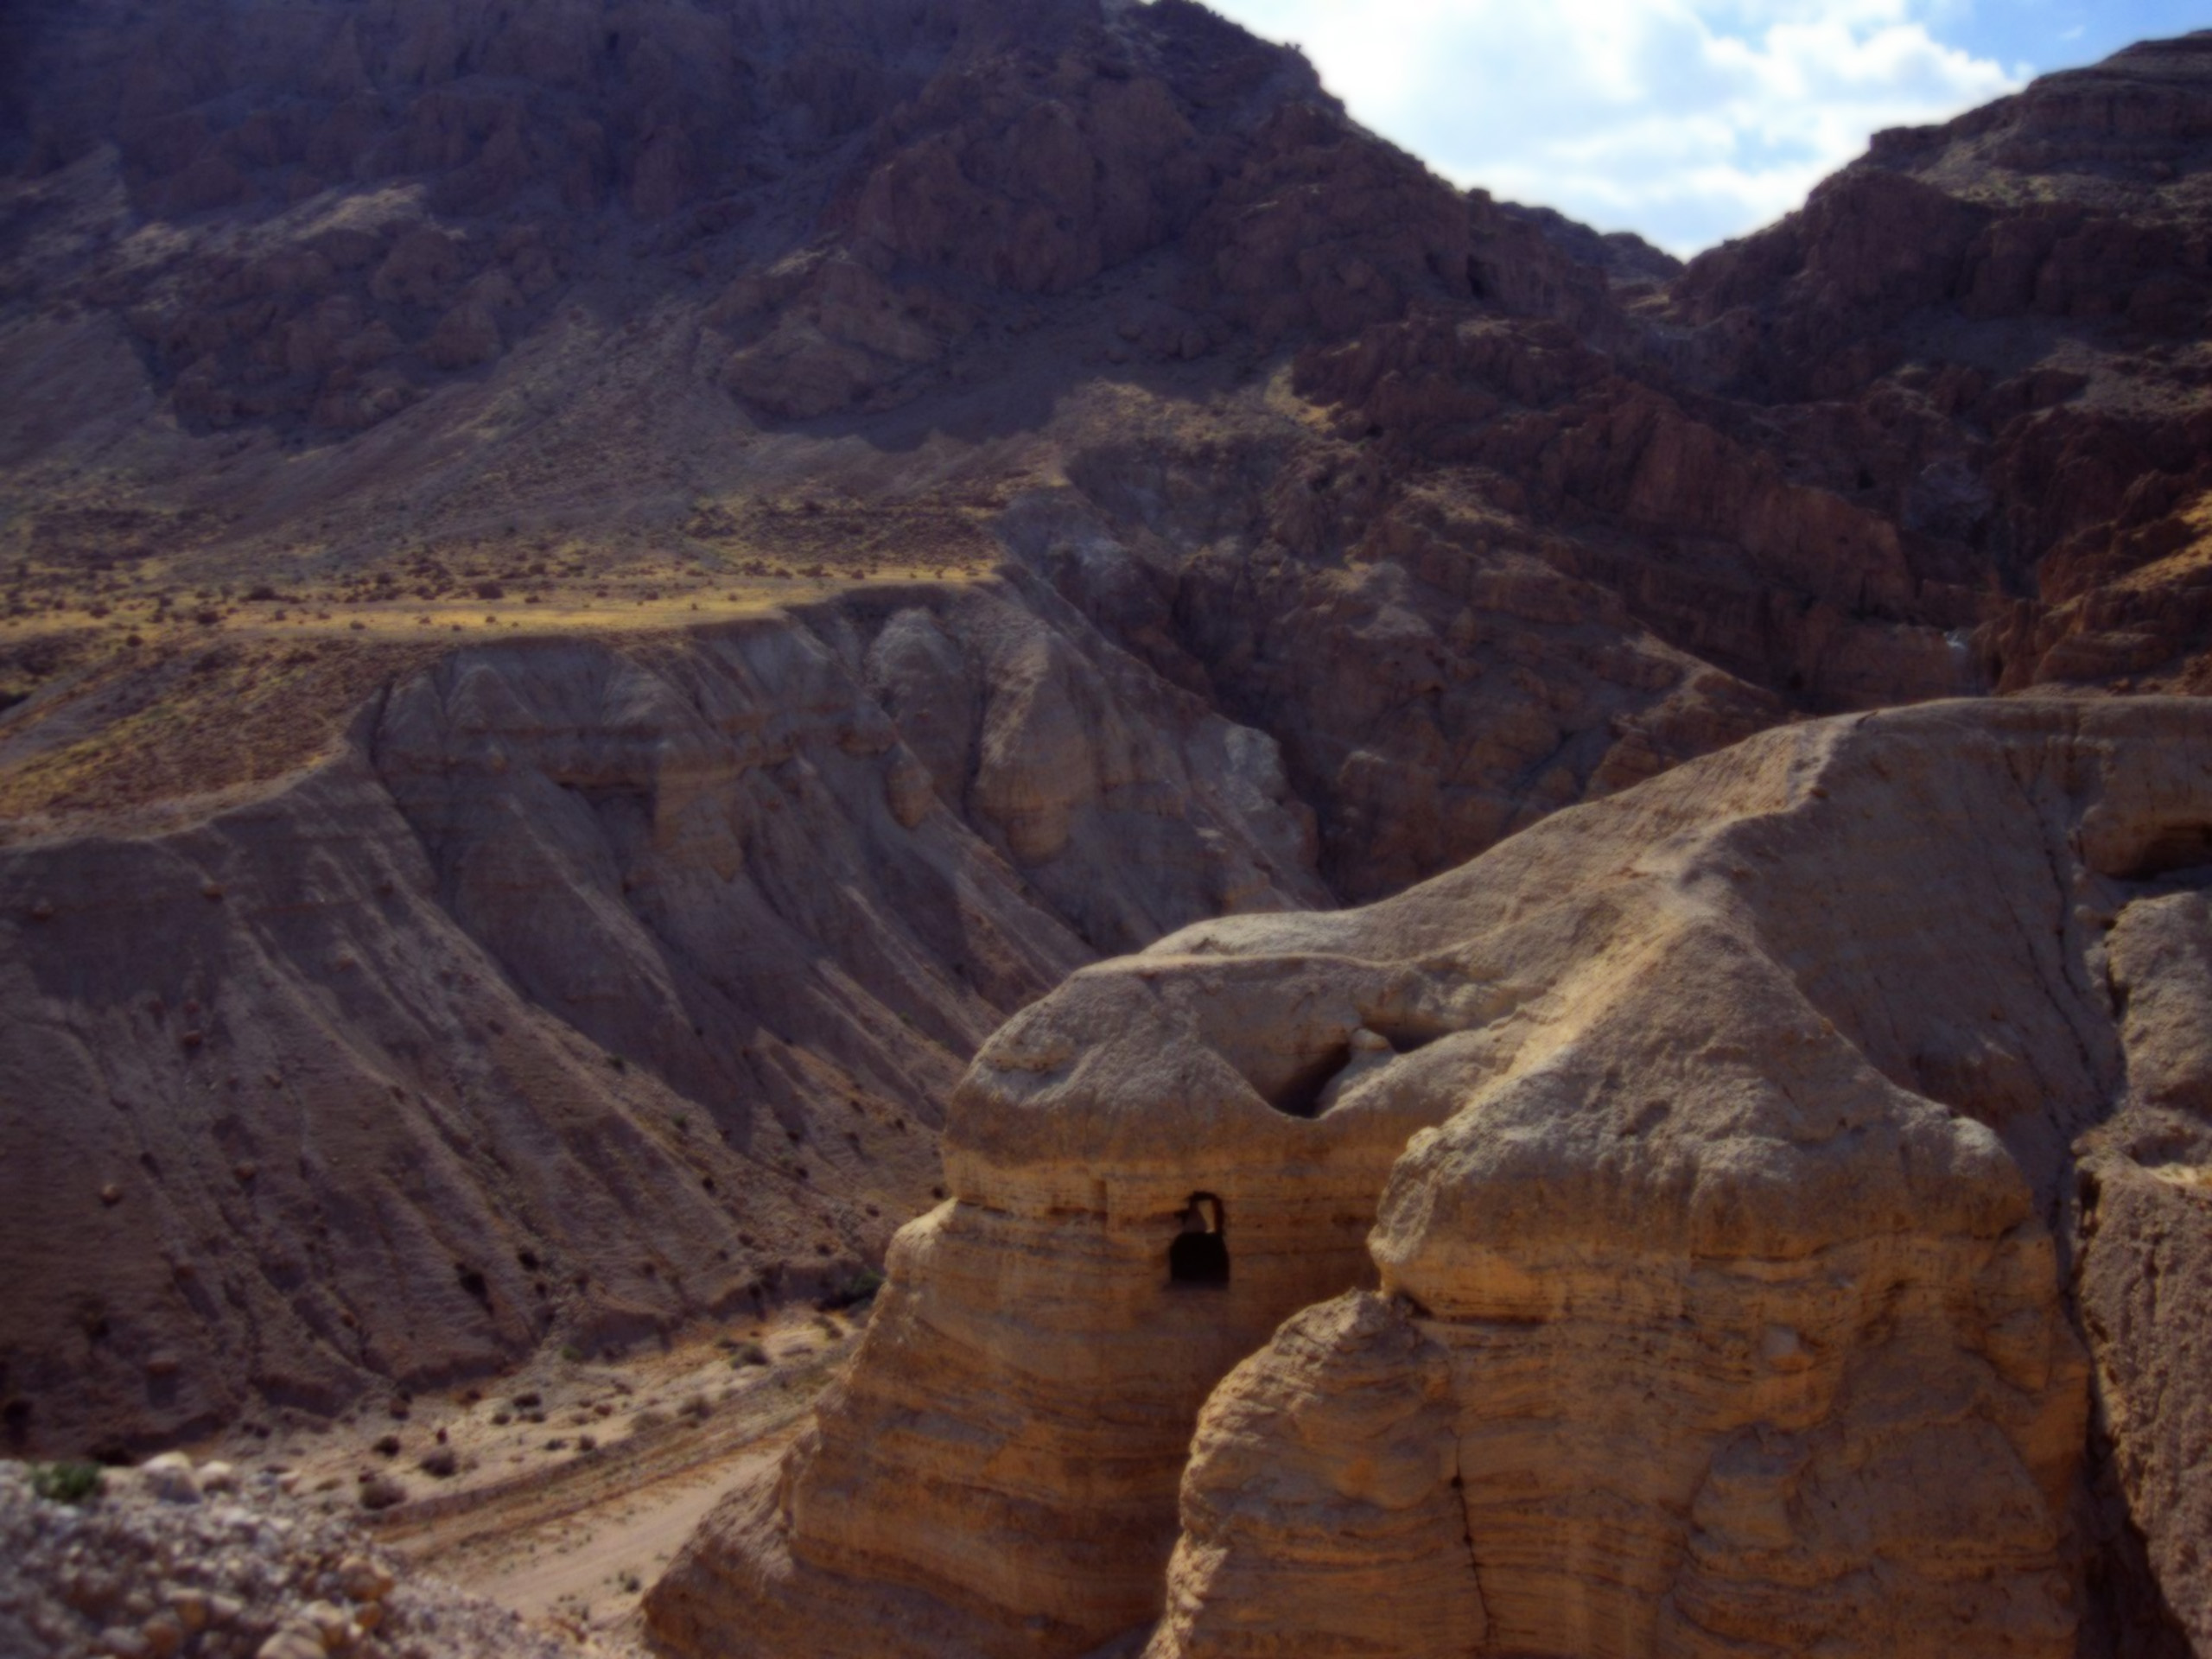 Hd Wallpapers Cave Of The Dead Sea Scrolls Qumran Cave - Dead Sea Scrolls Caves - HD Wallpaper 